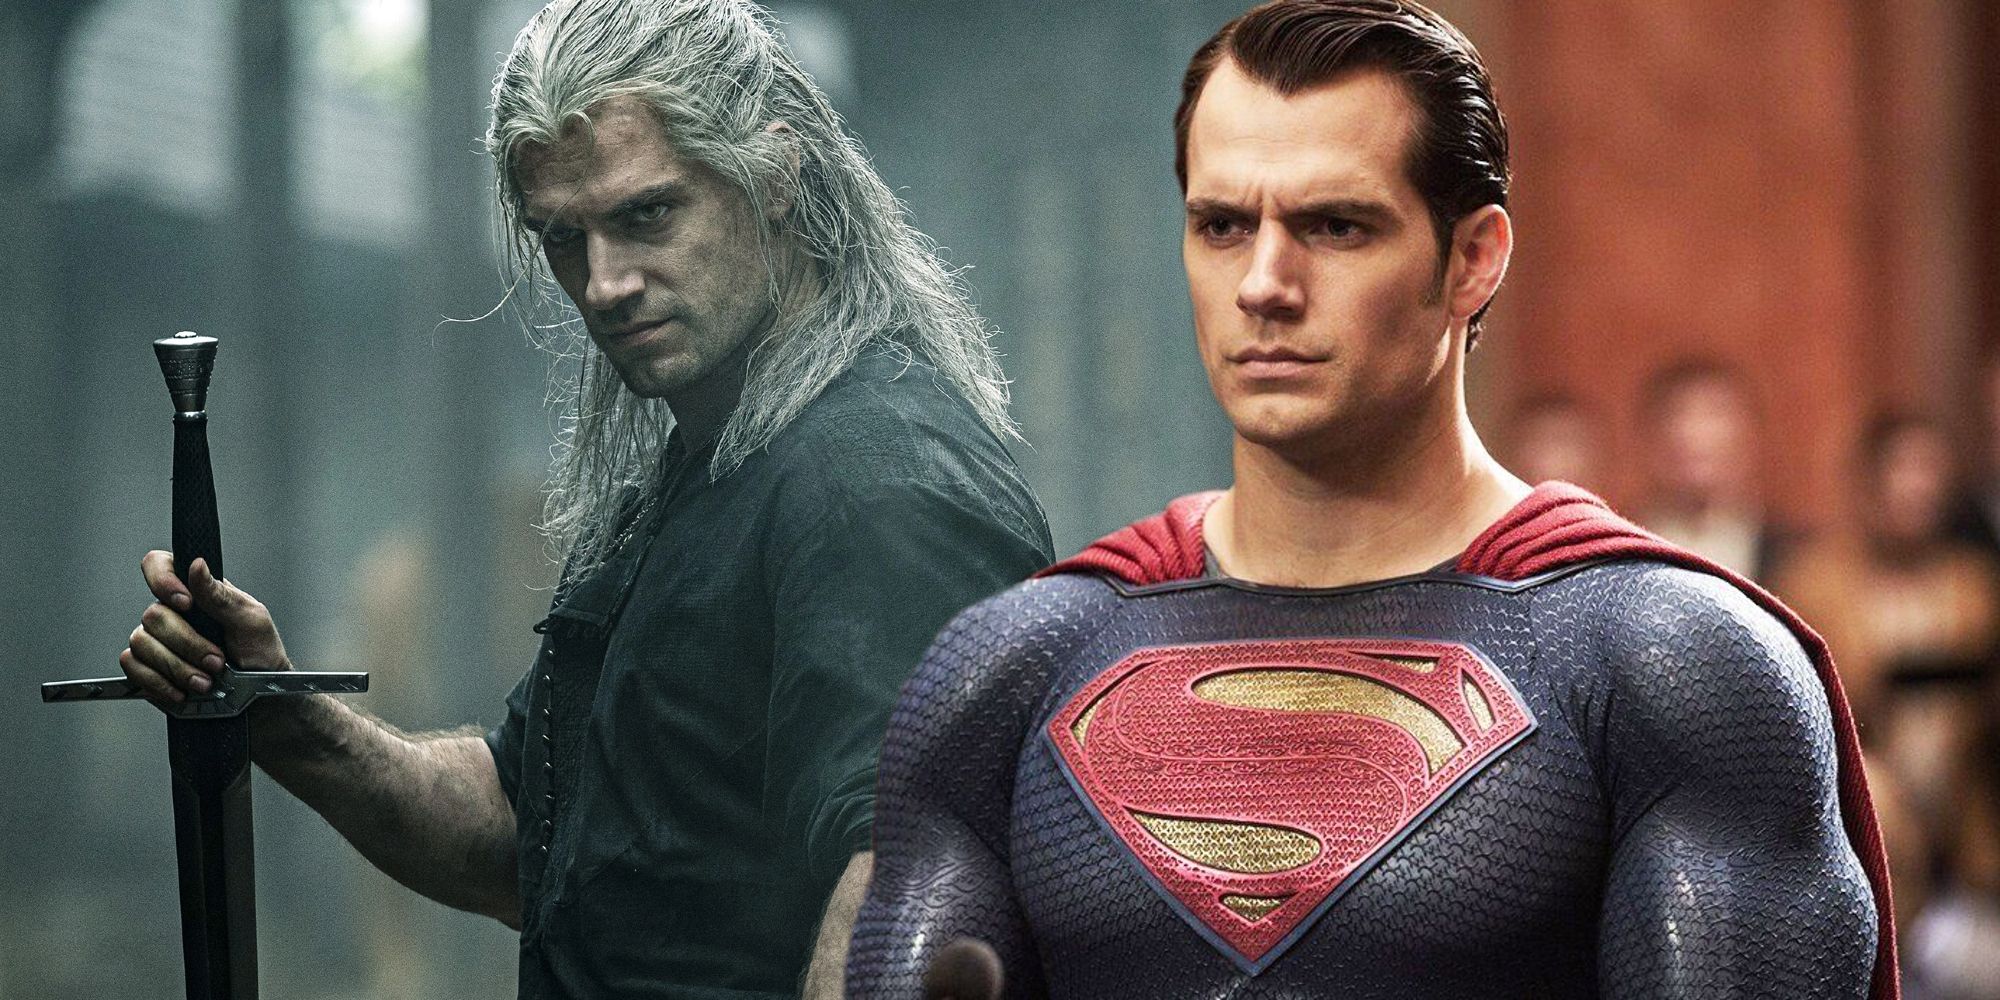 Henry Cavill as Geralt and Superman